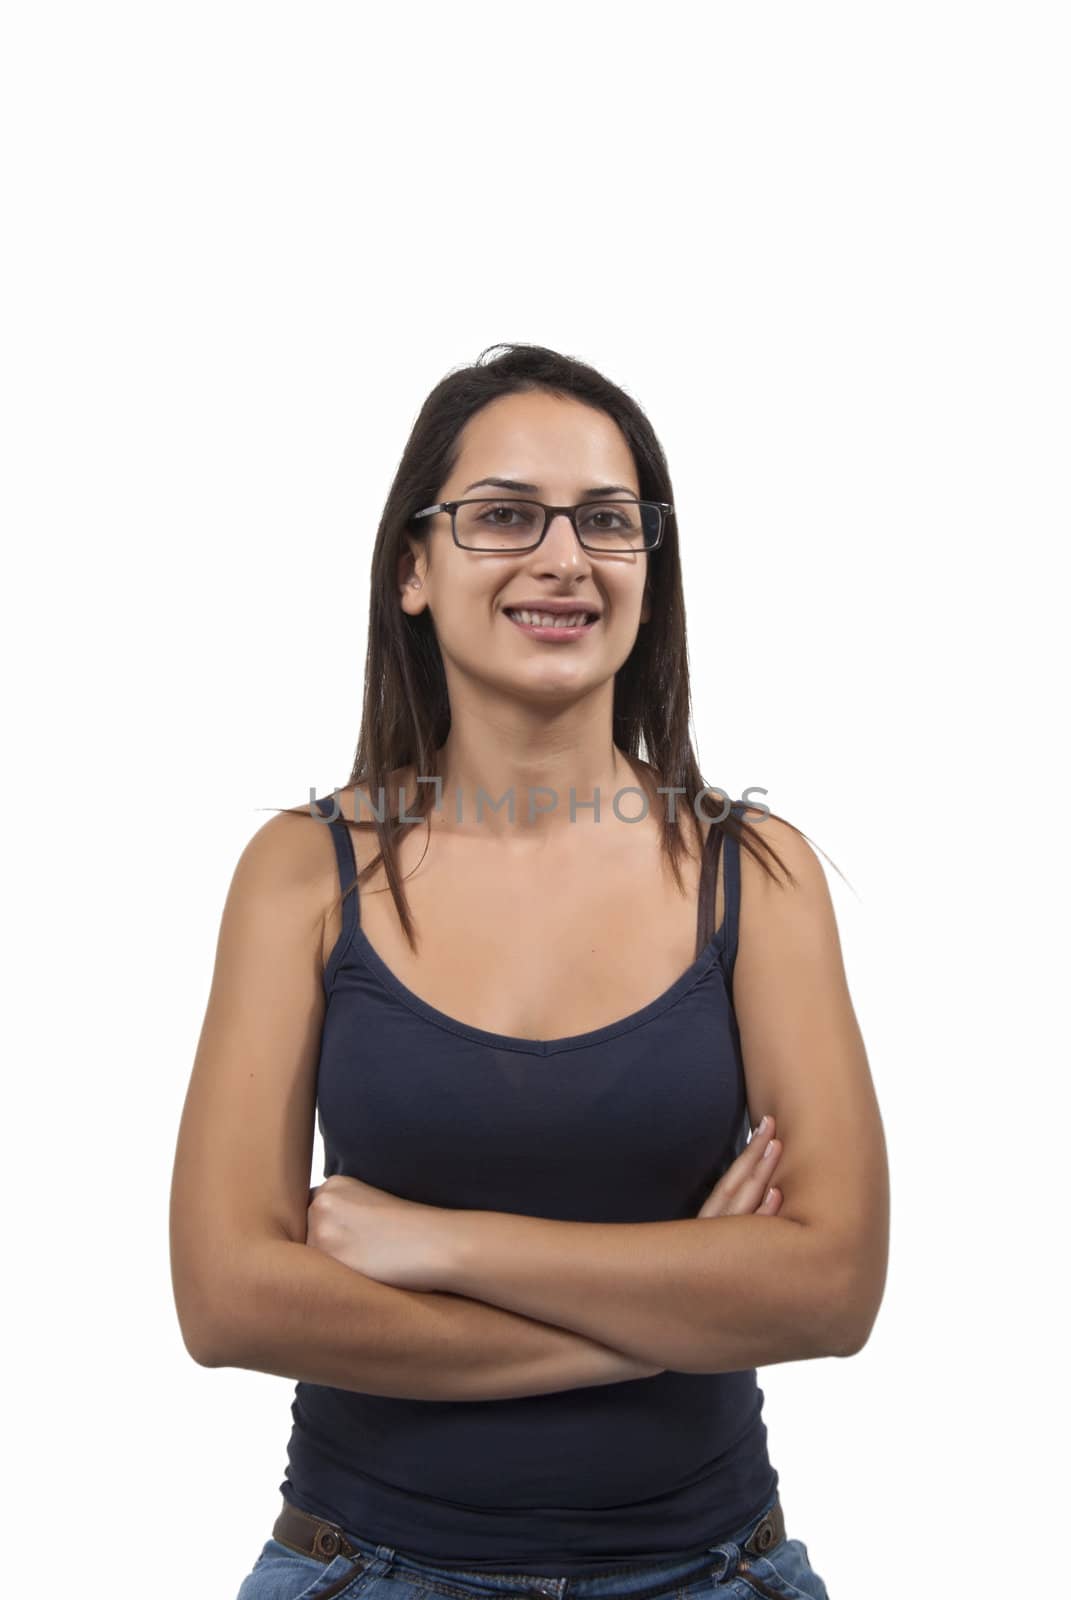 Lady with glasses smiling by pencap